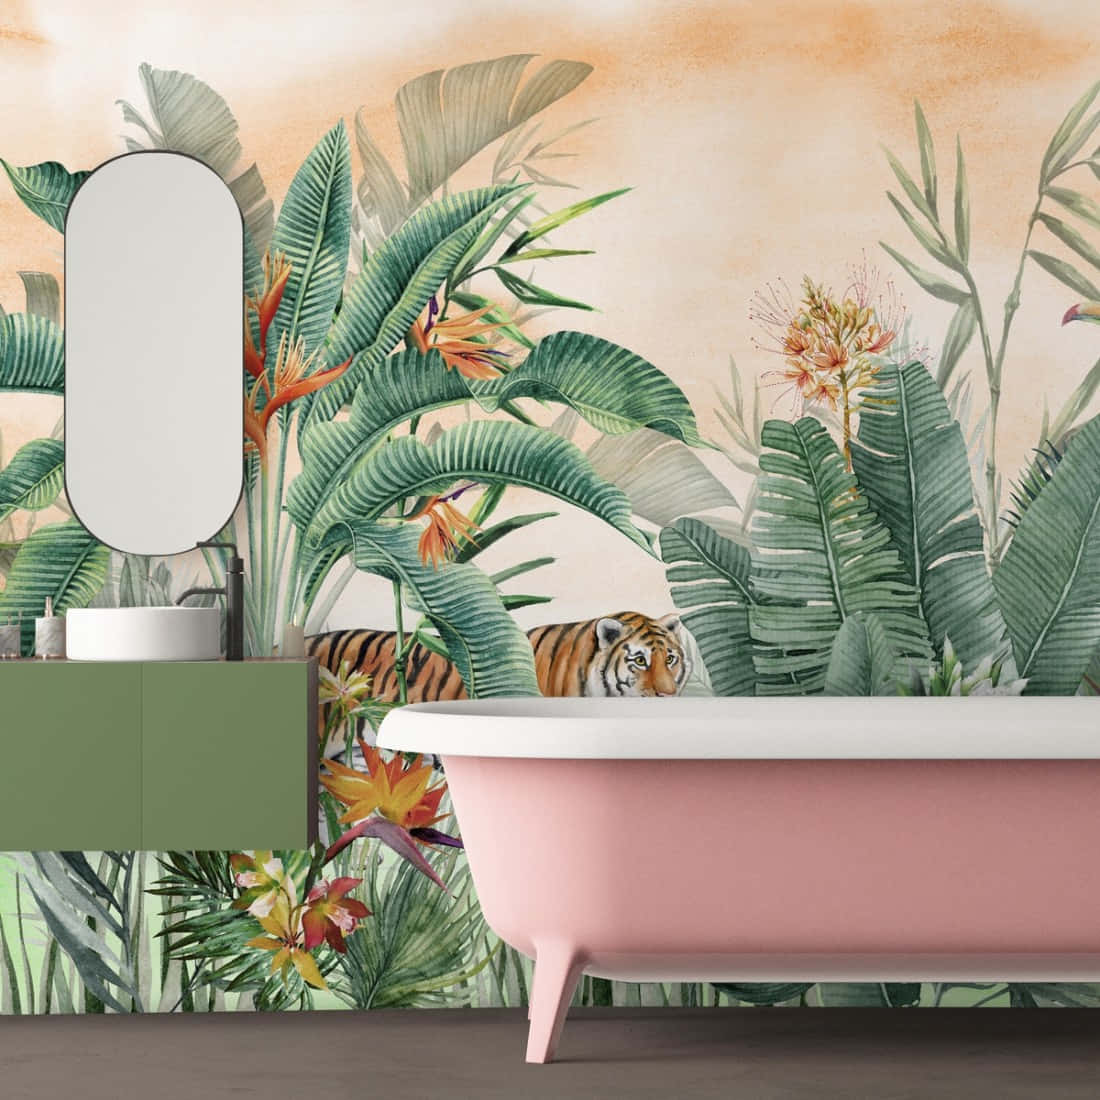 Caption: "Unleash Your Wild Side with Jungle Themed Bathroom Decor" Wallpaper